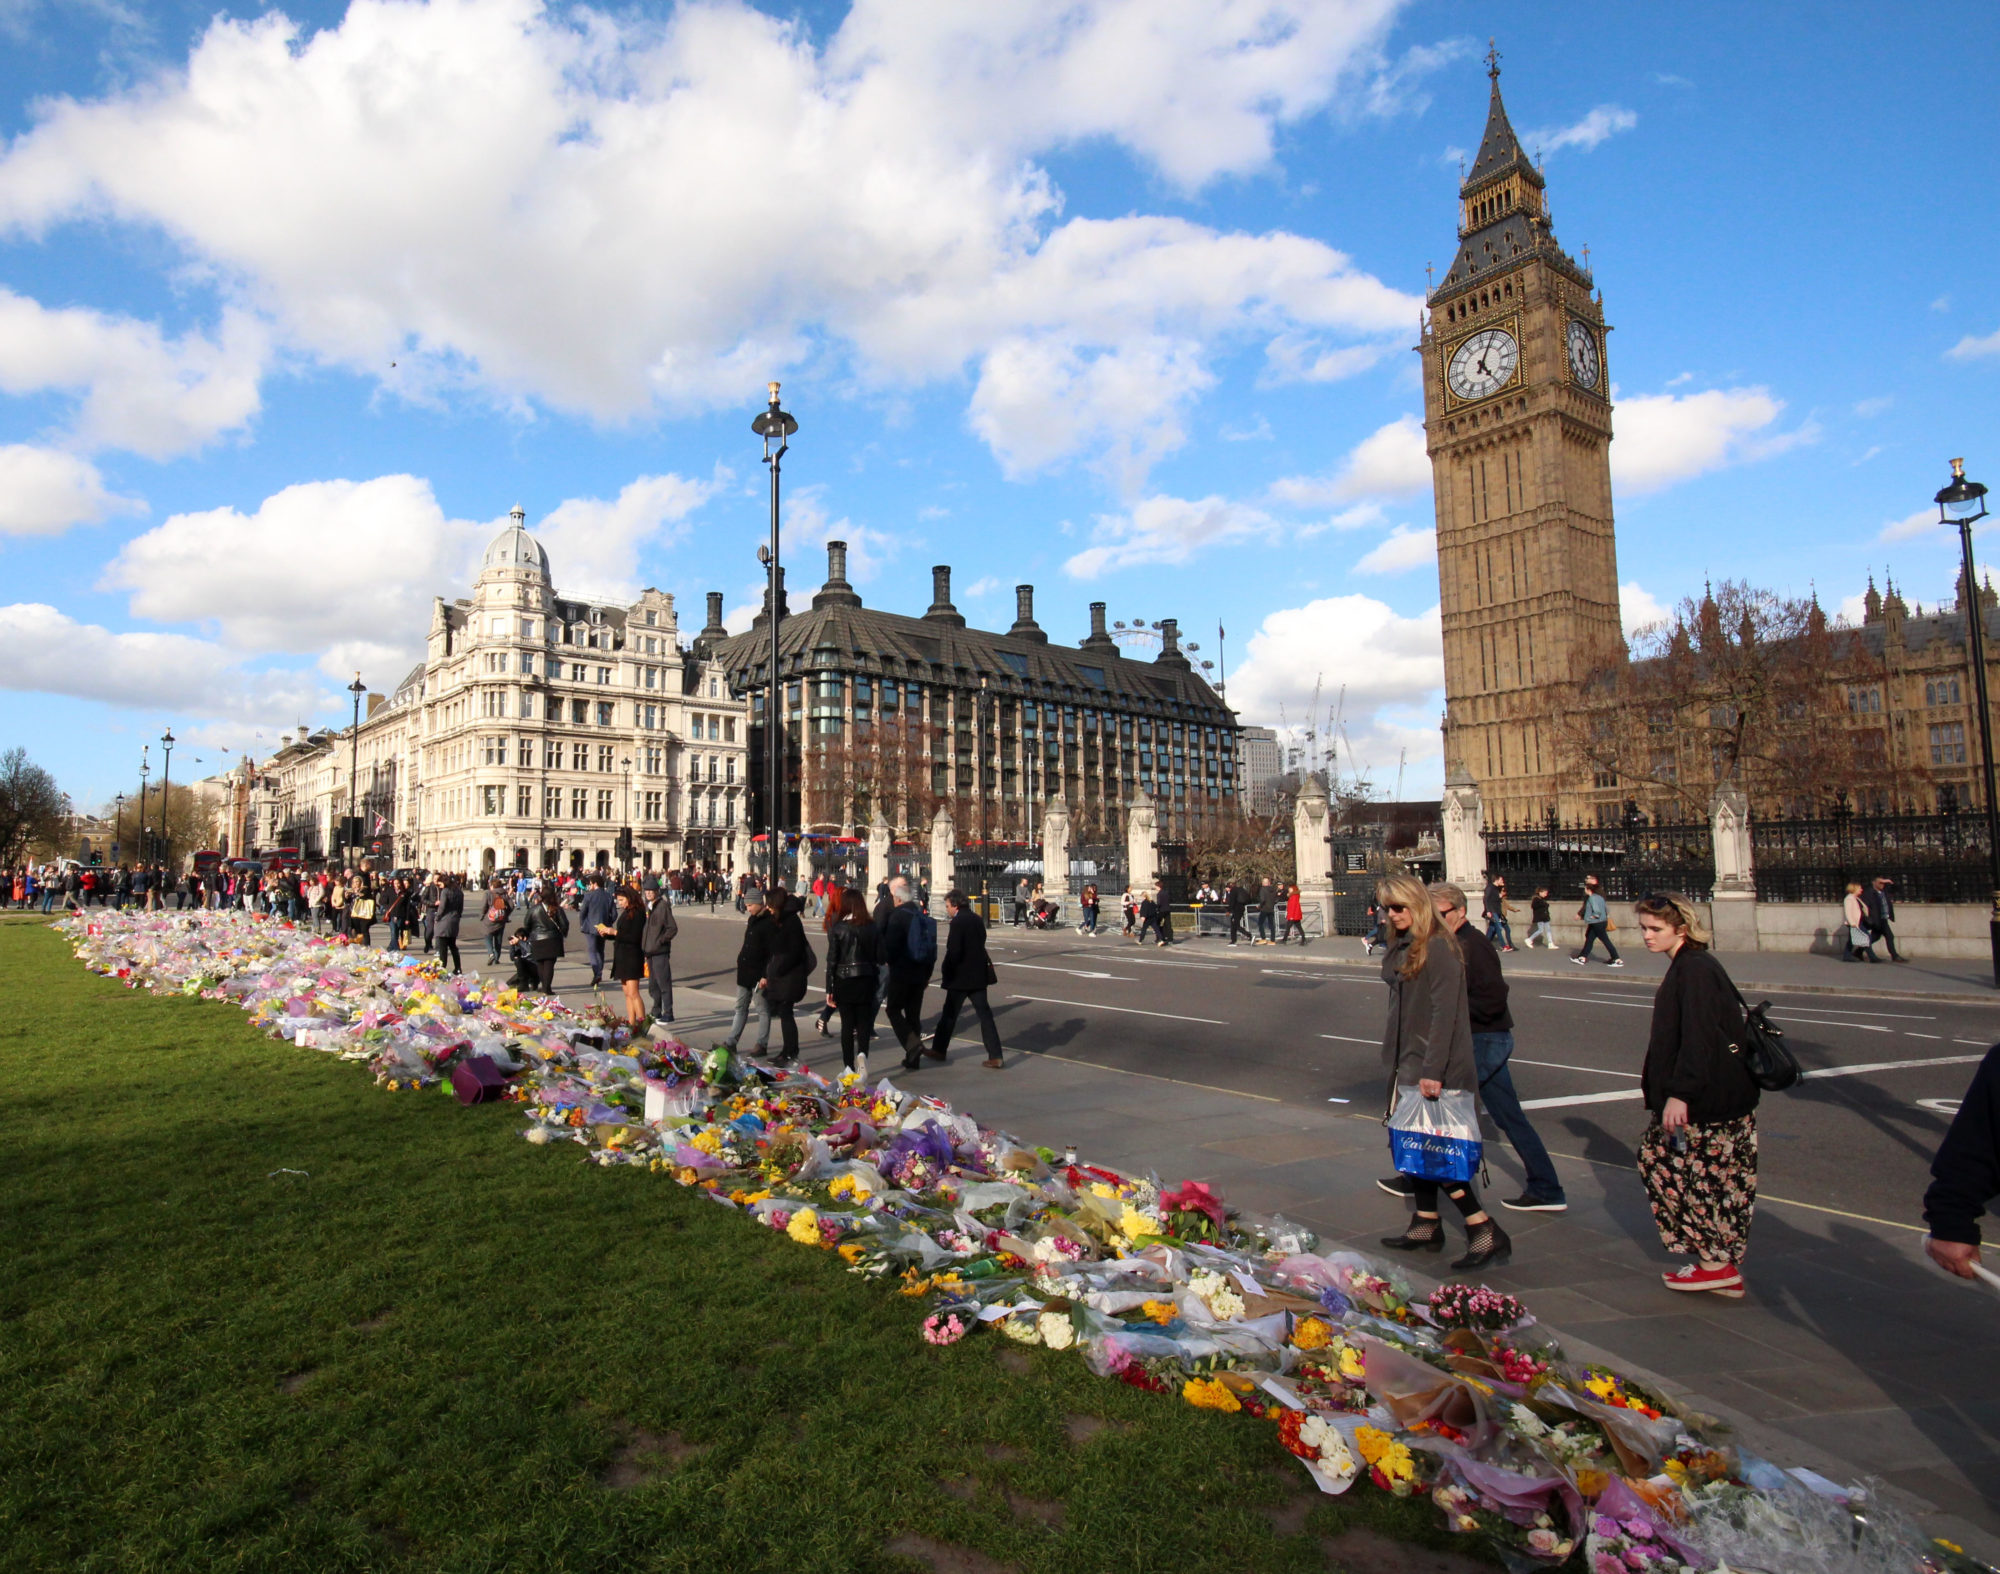 Britain Has a Flawed Response to Islamist Terrorism’s Threat